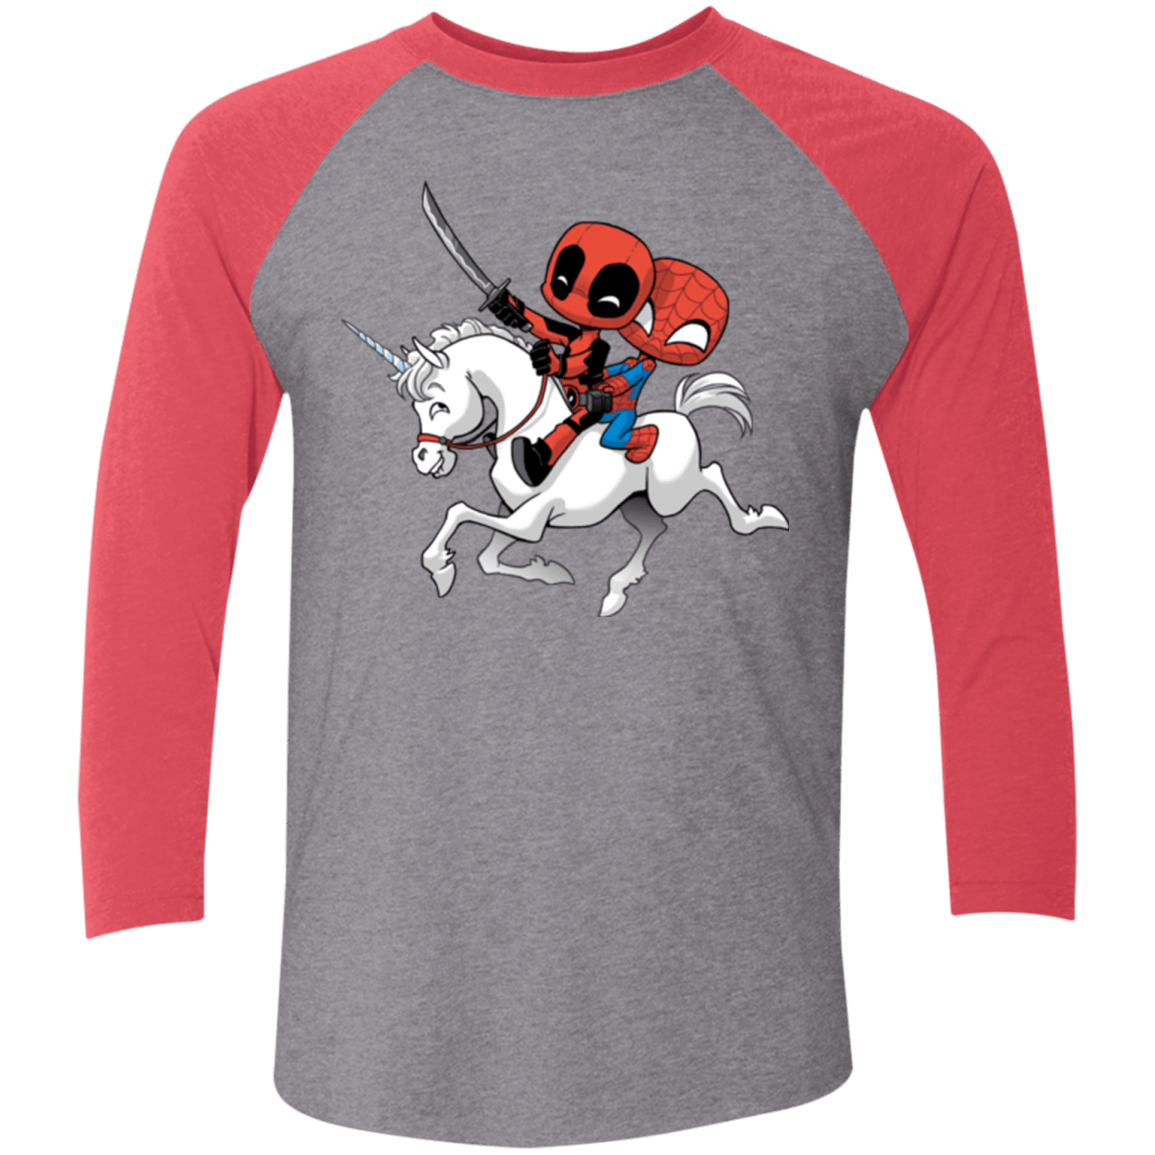 T-Shirts Premium Heather/ Vintage Red / X-Small Magical Friends Men's Triblend 3/4 Sleeve